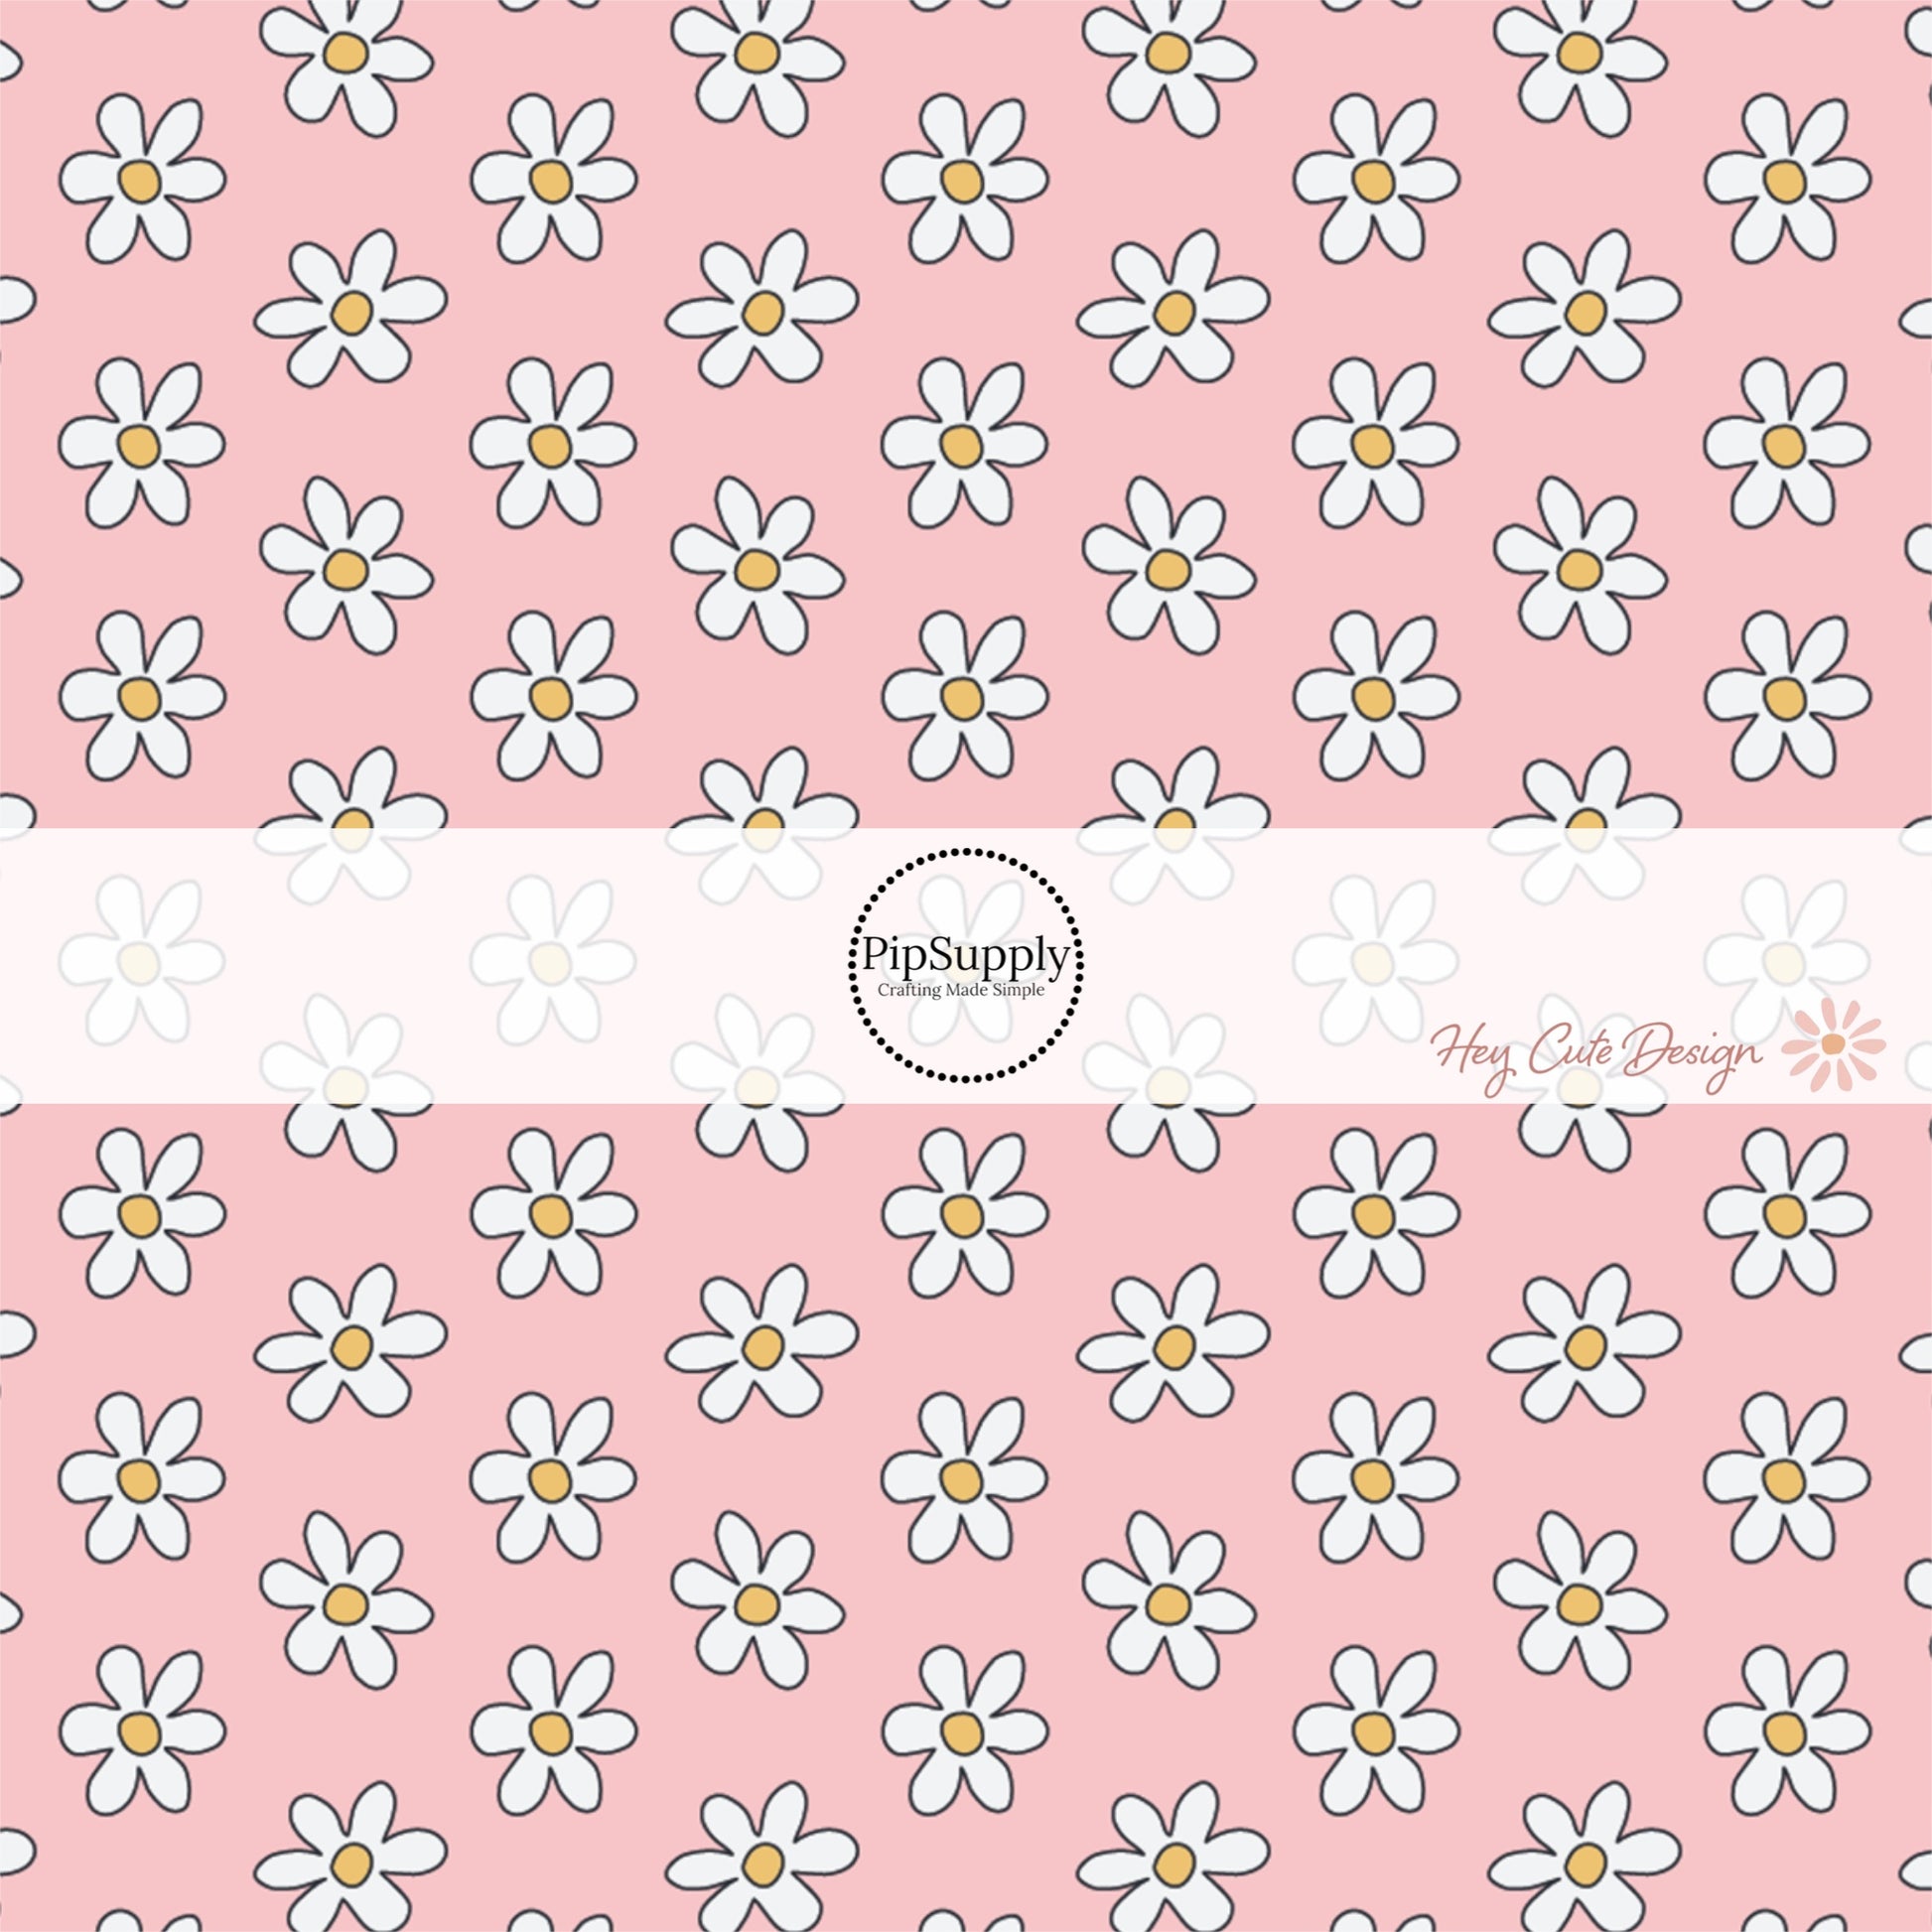 White daisies with yellow centers on pink fabric by the yard  - Spring Fabric by the Yard 